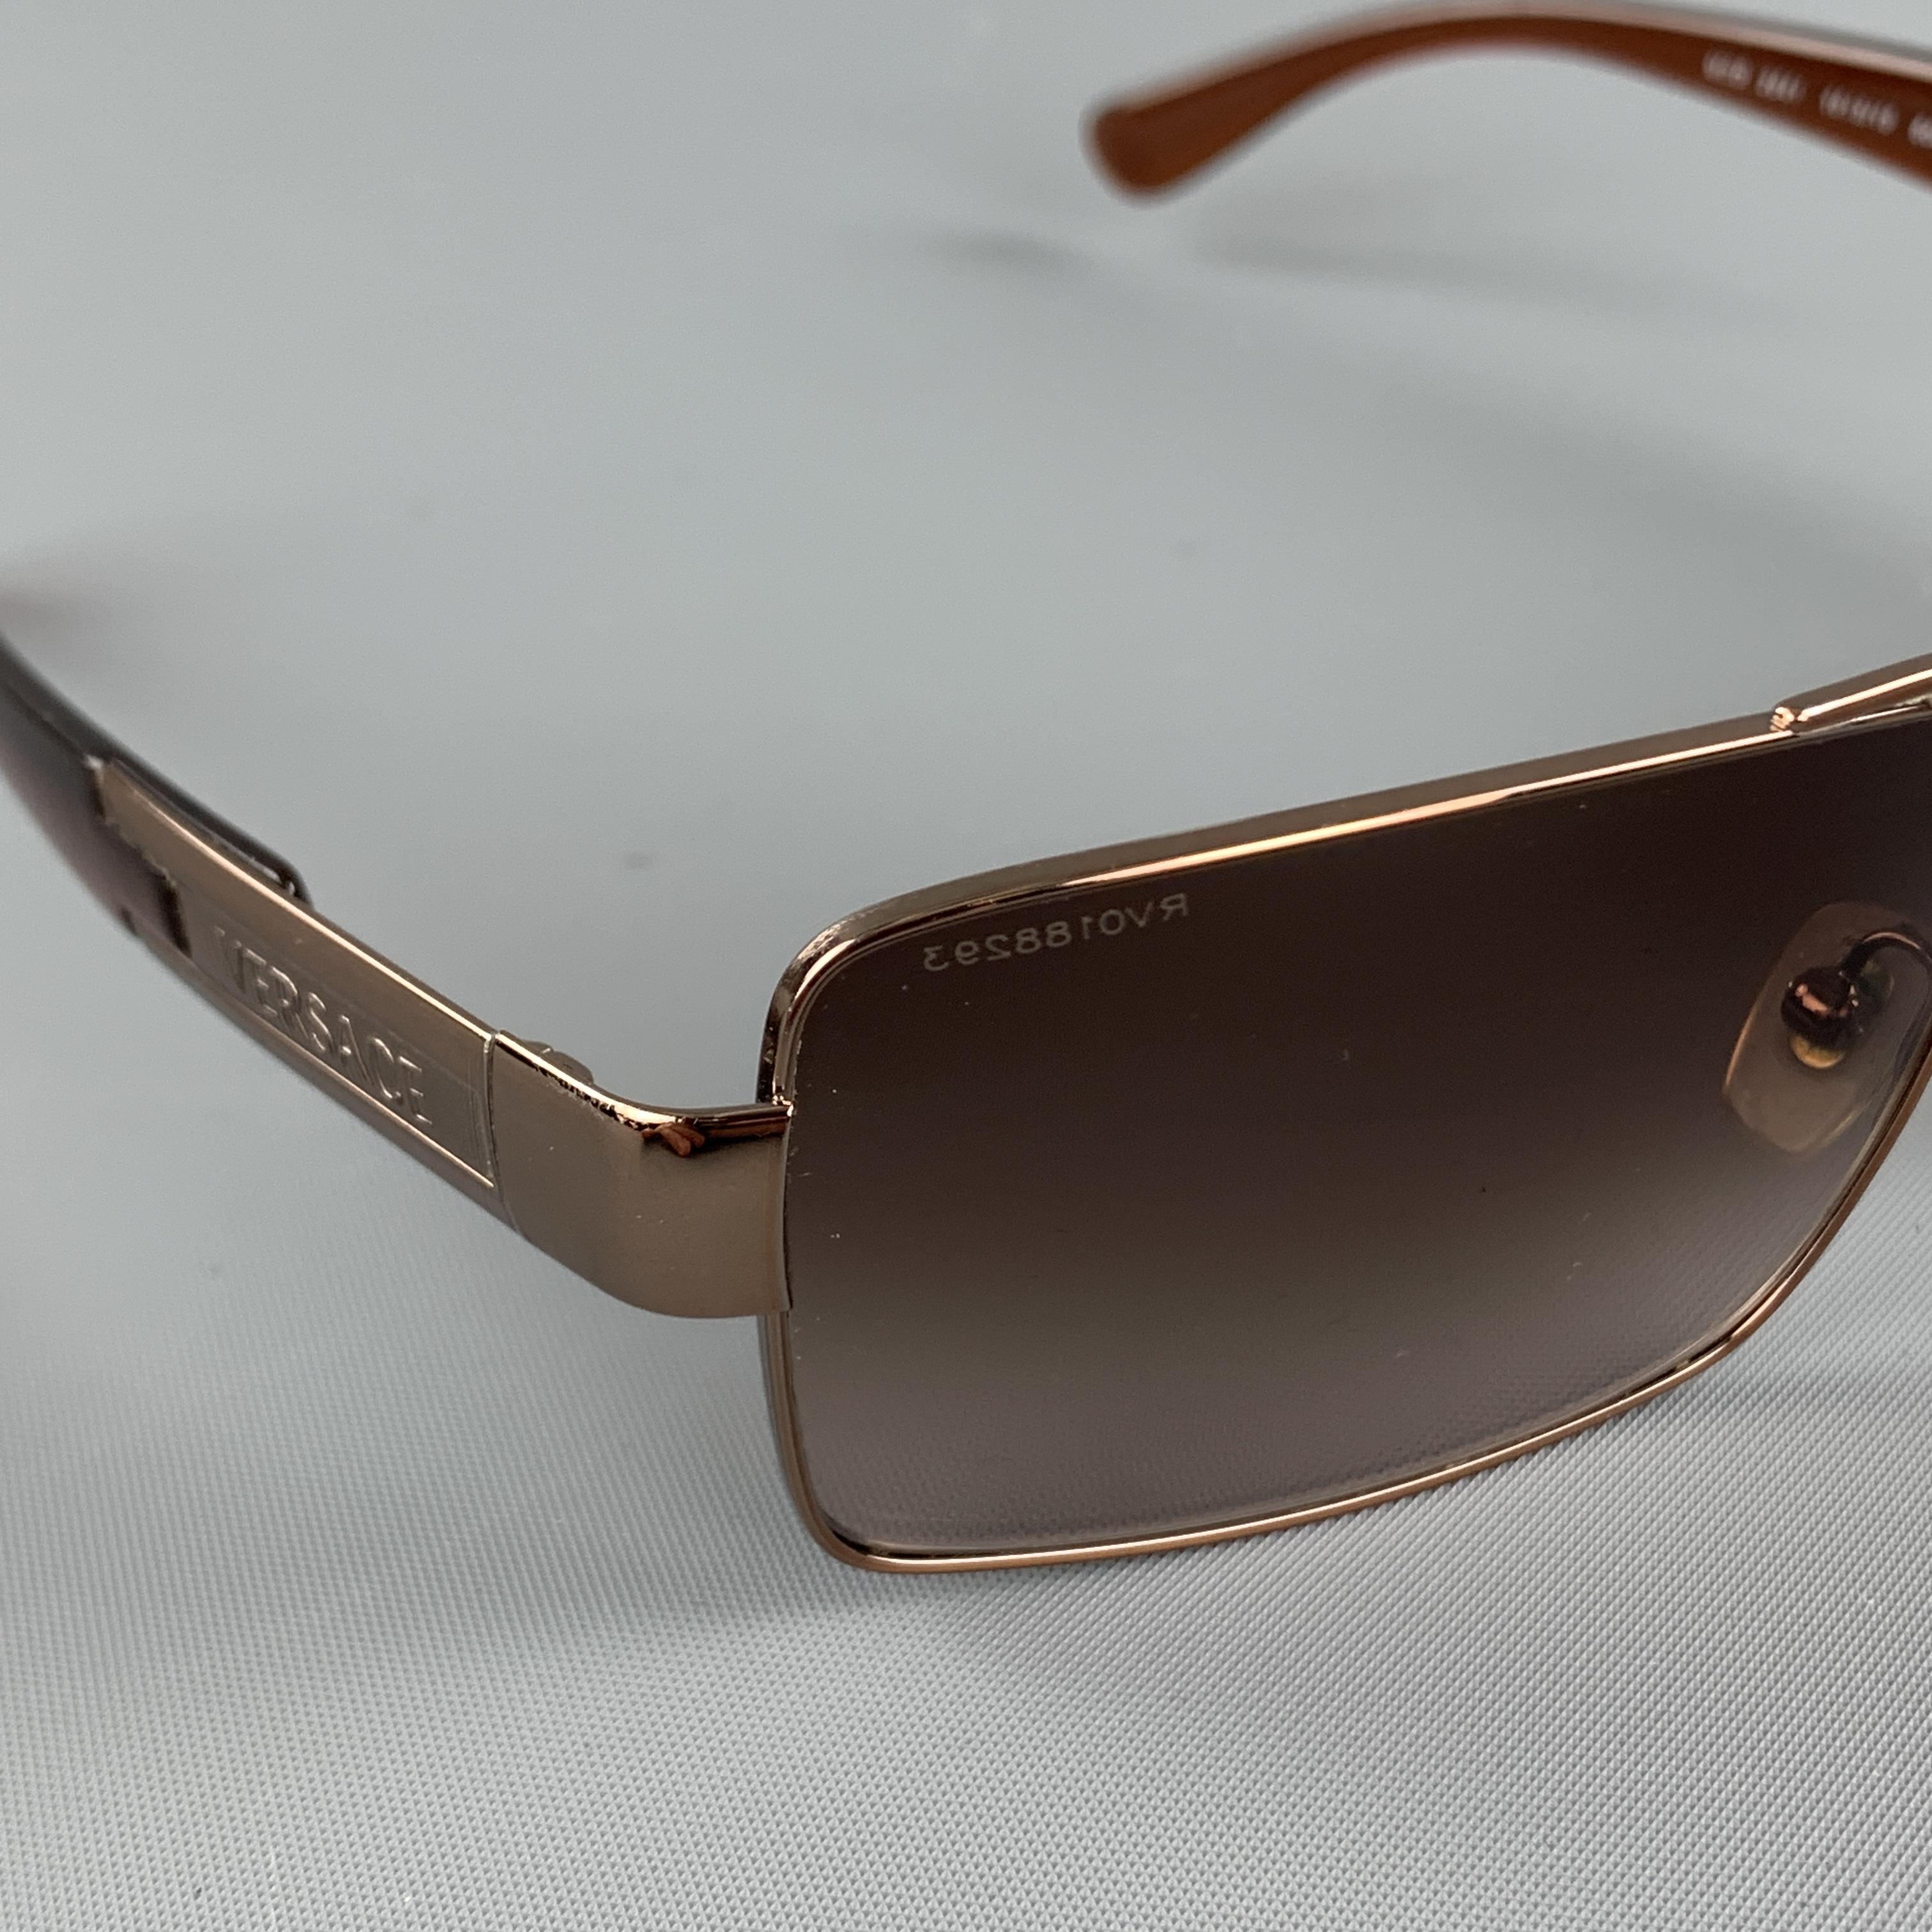 VERSACE sunglasses come in a copper tone metal with brown ombre square lenses and clear brown arms. Made in Italy..

Very Good Pre-Owned Condition.
Marked: 2041

Measurements:

Length: 14 cm.
Height: 4 cm